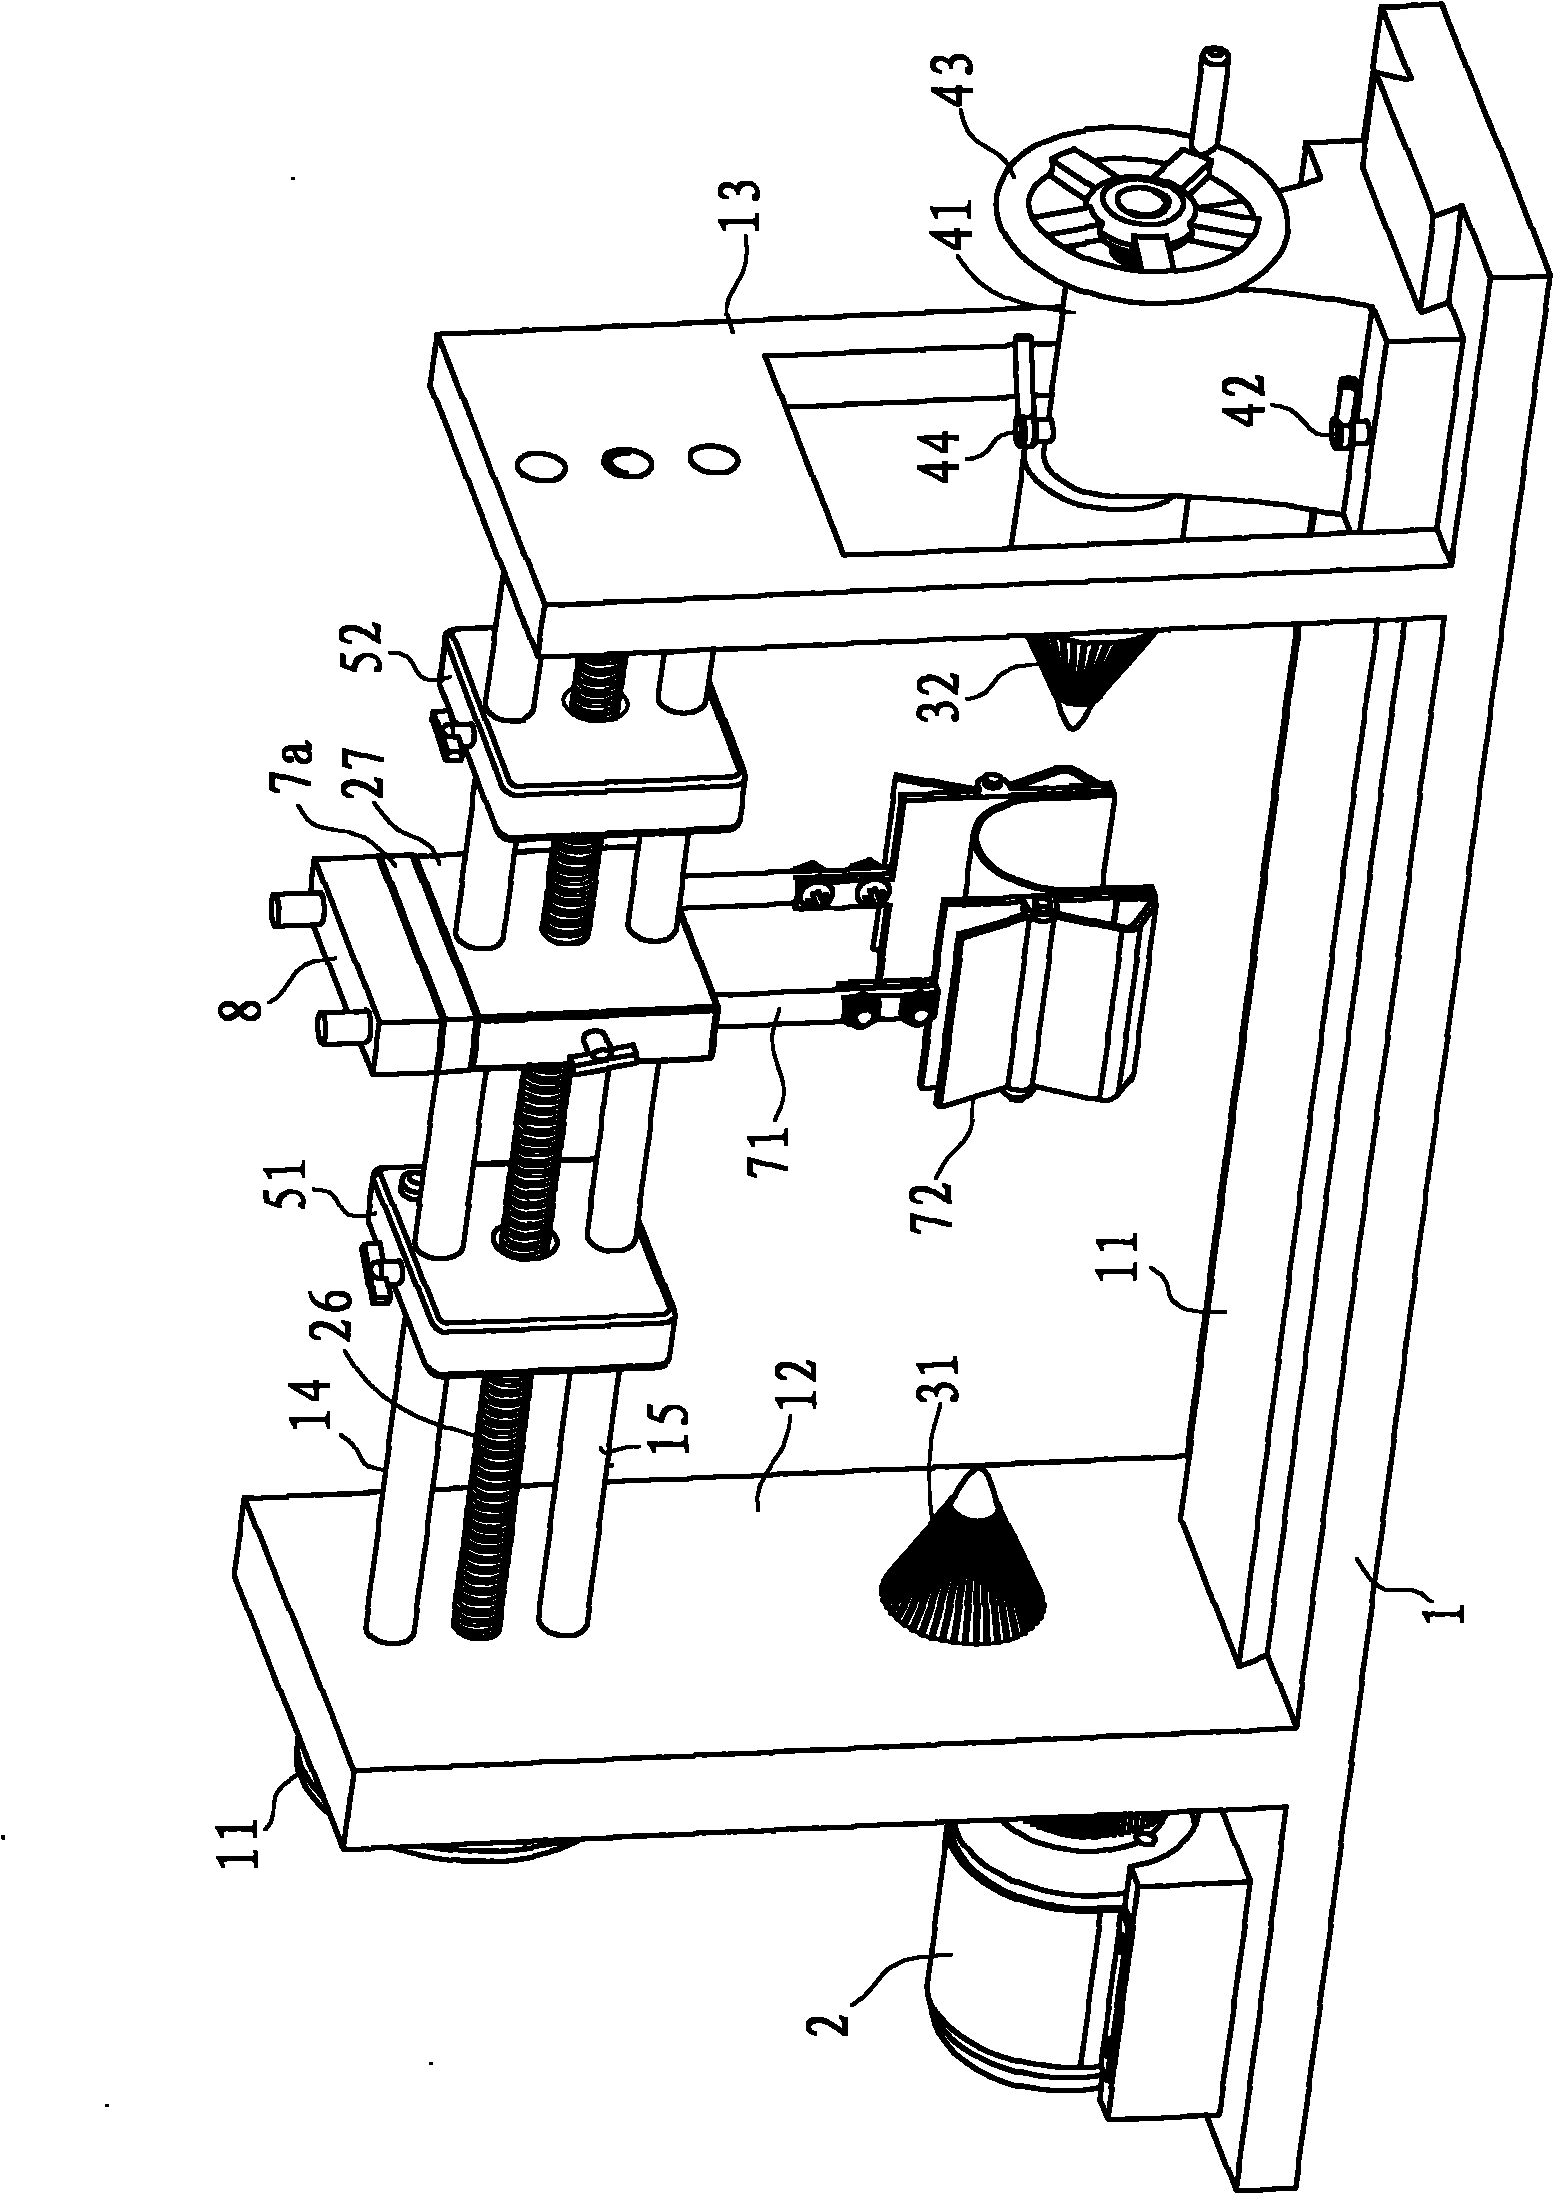 Grinding device of pipes used for curved surface anti-buckling tests of adhesive tapes